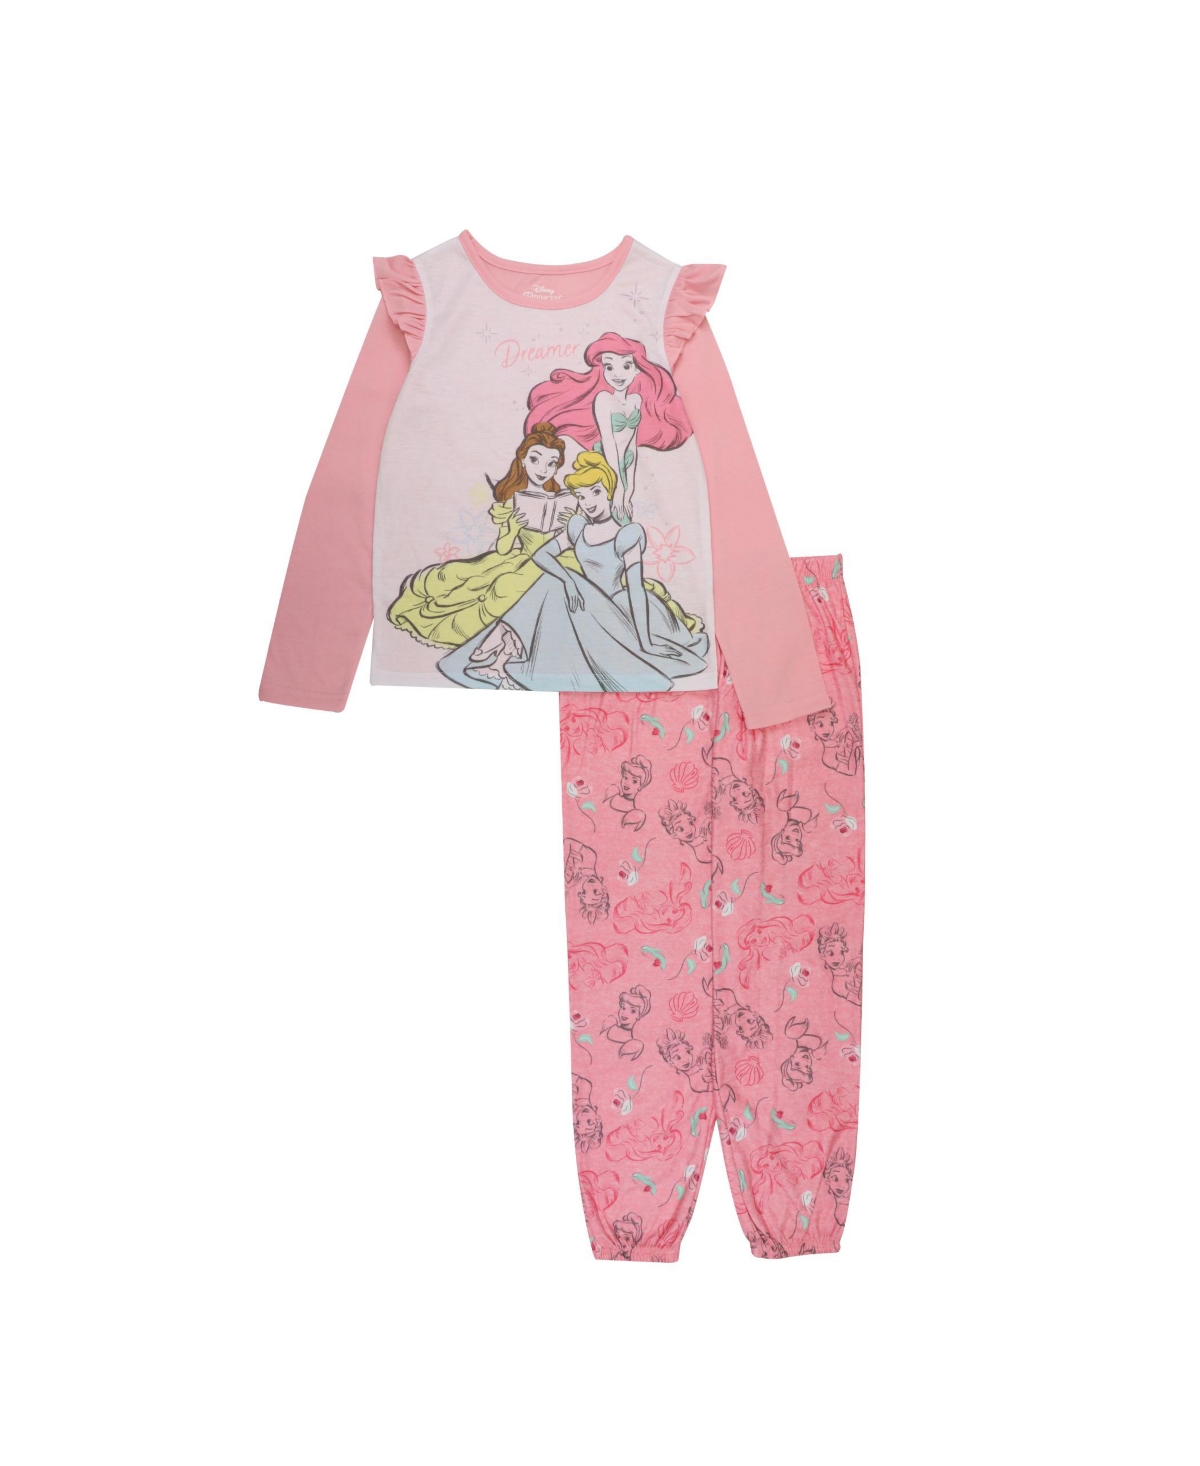 Ame Little Girls Disney Princess Top And Pajama, 2-piece Set In Assorted